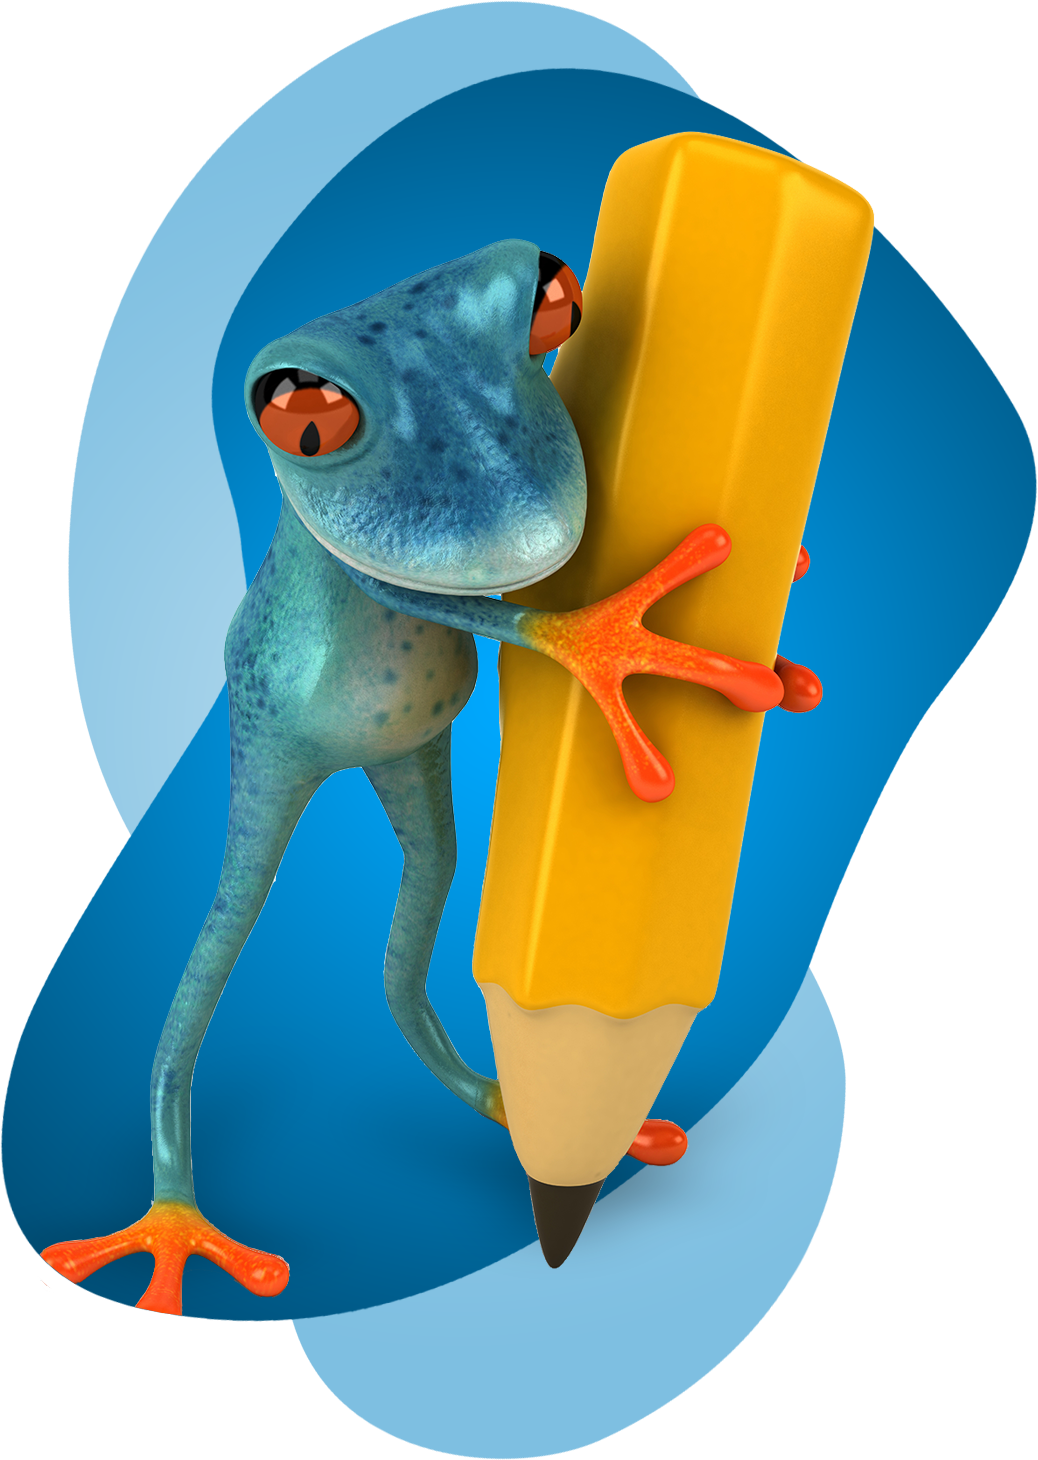 Cartoon frog with giant pencil